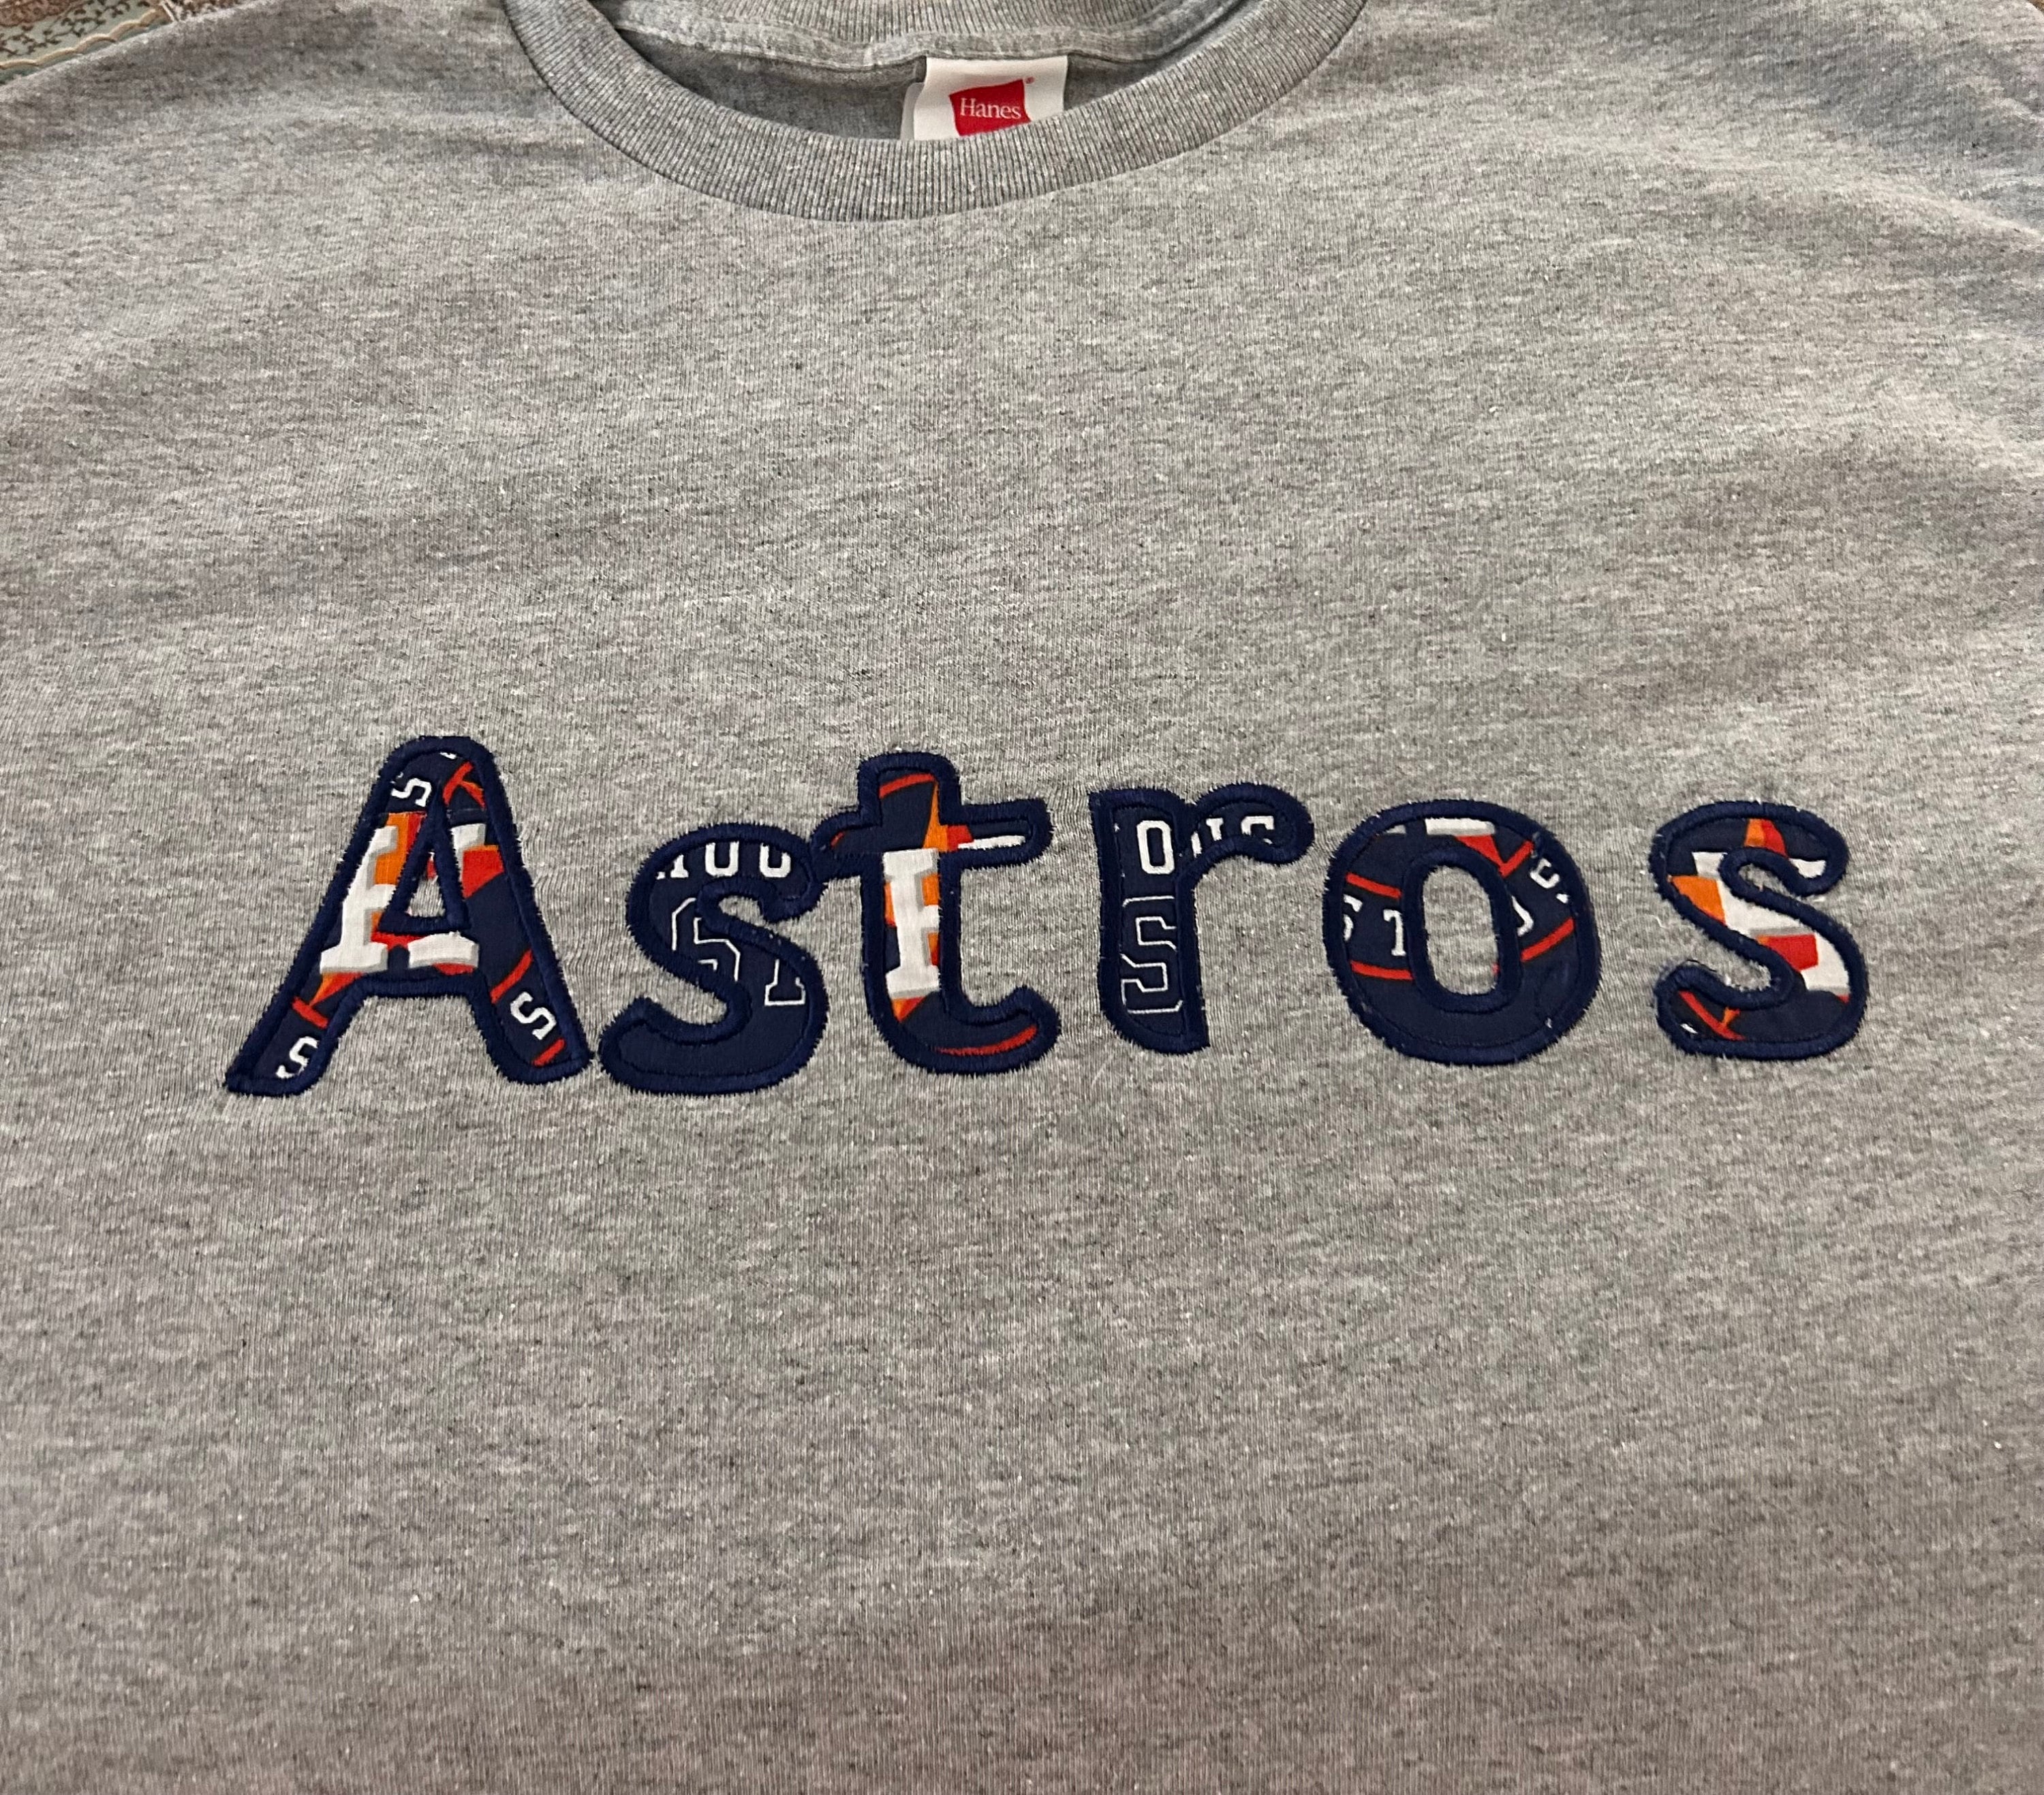 ASTROS Applique on a T-shirt of Your Color so You Can Show 